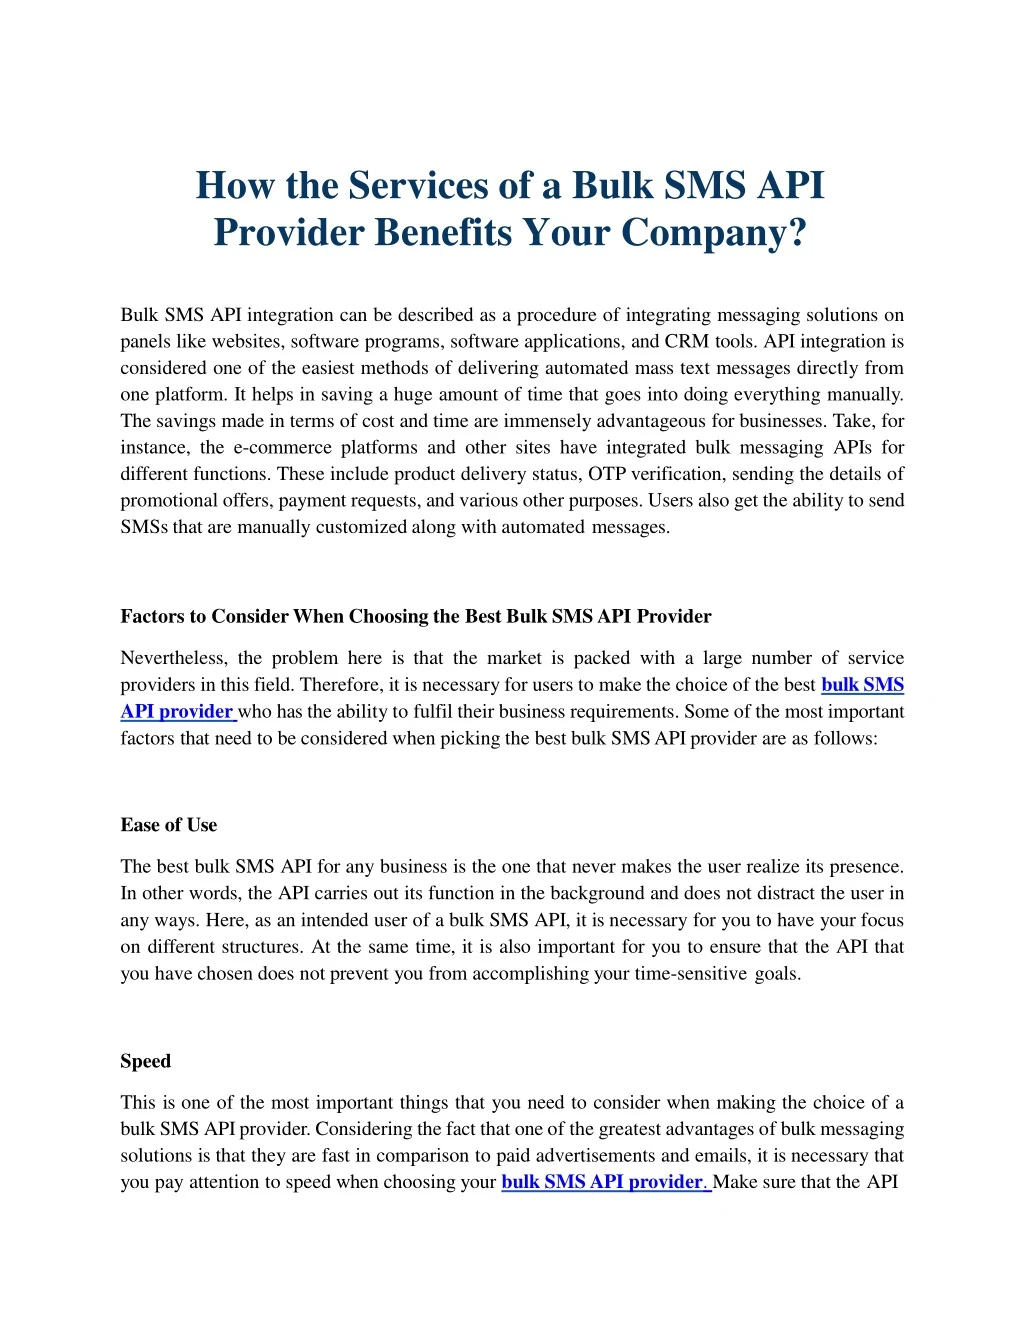 how the services of a bulk sms api provider benefits your company